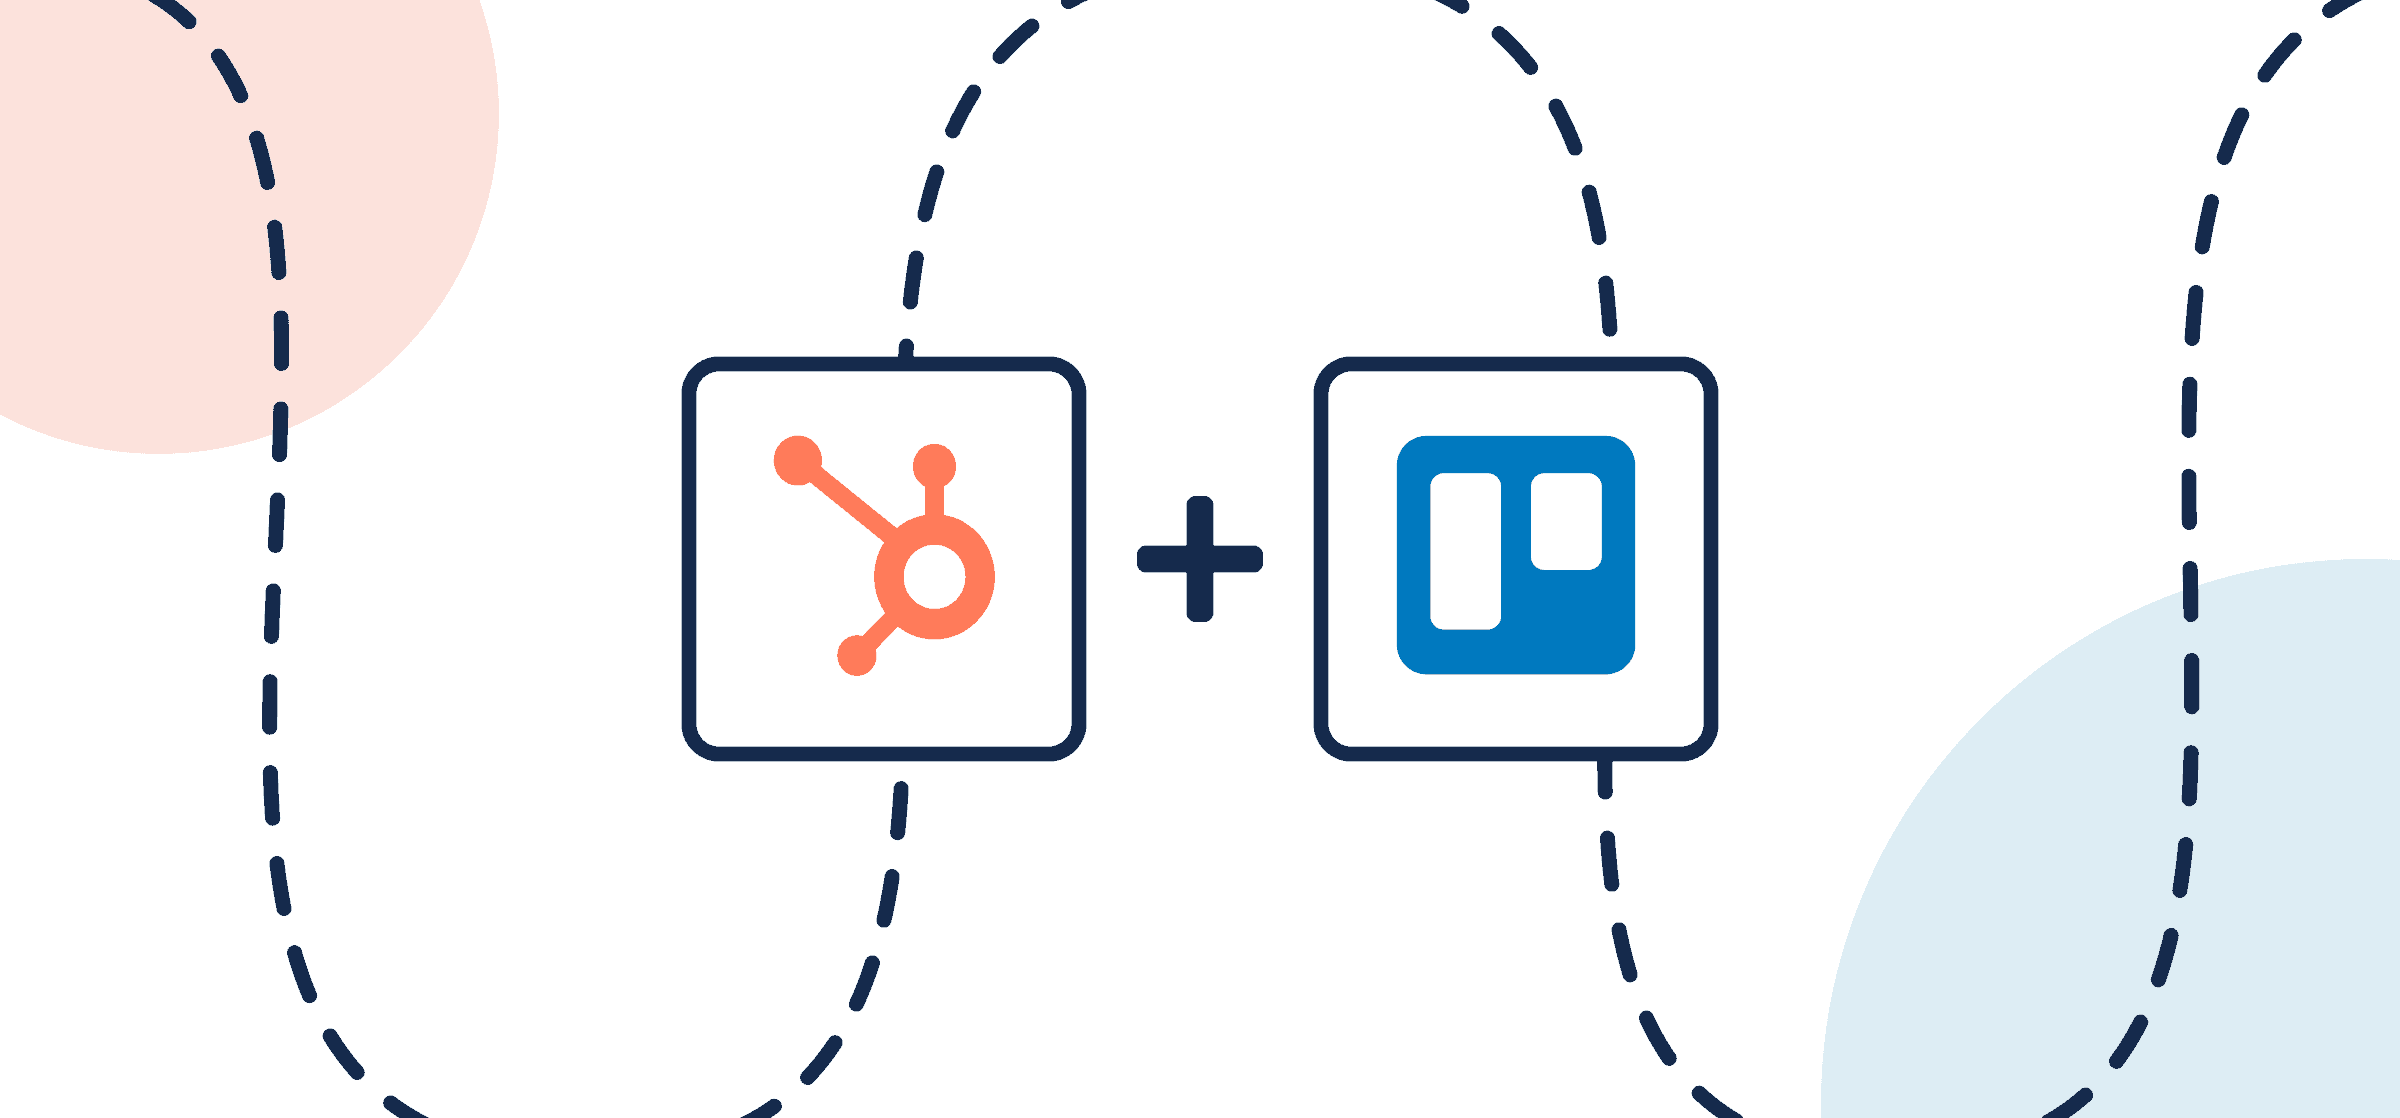 Featured image displaying the logos of Trello and HubSpot in Unito's guide to setting up a simple Two-Way Sync